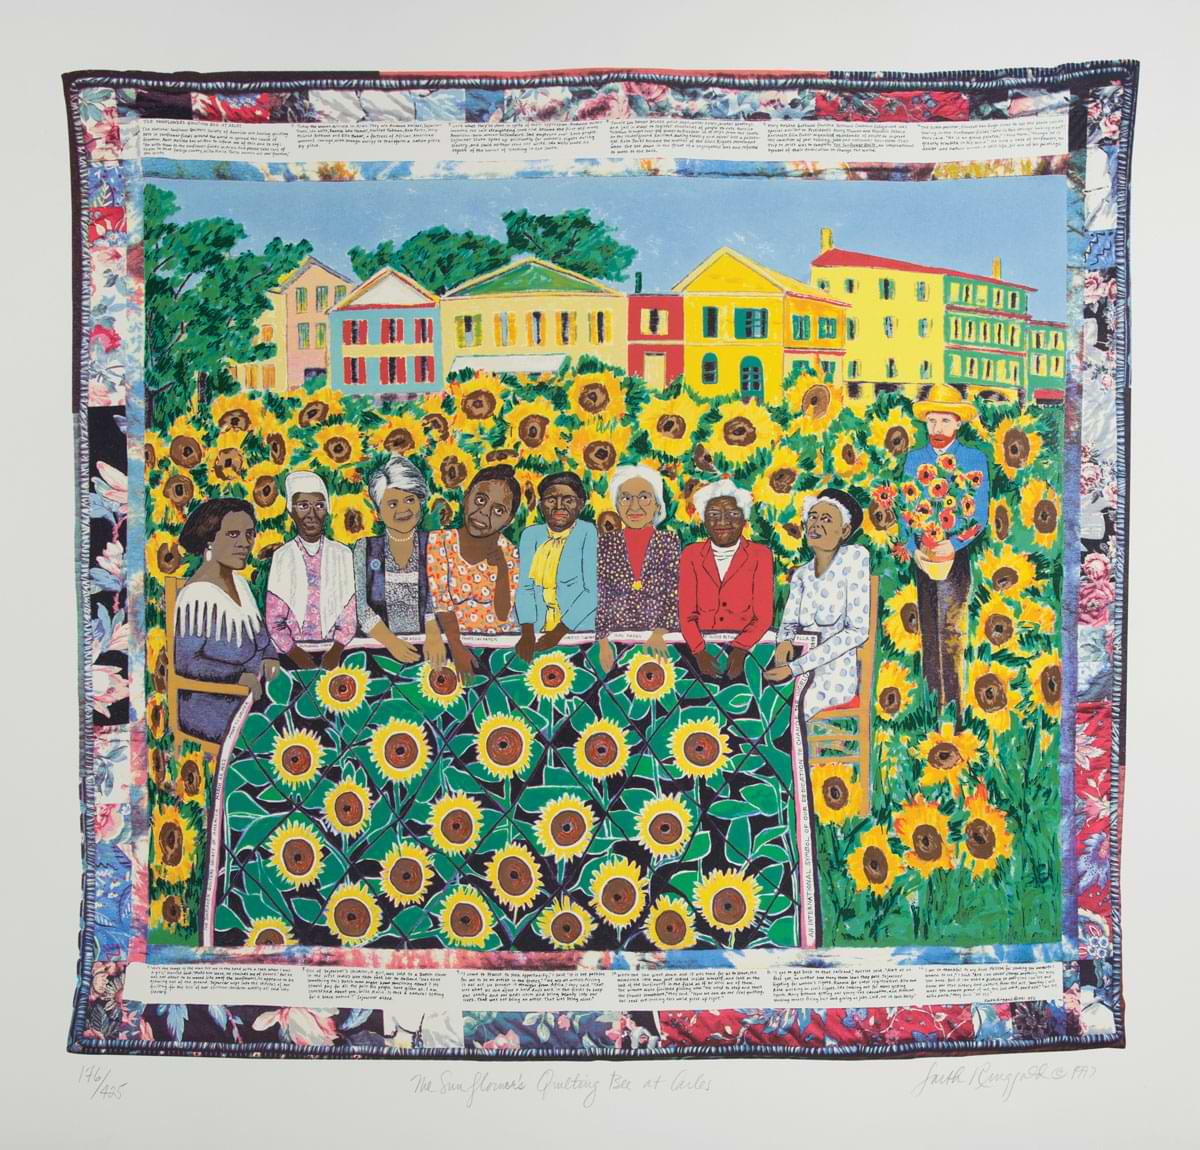 Faith Ringgold, The Sunflower’s Quilting Bee at Arles, 1997